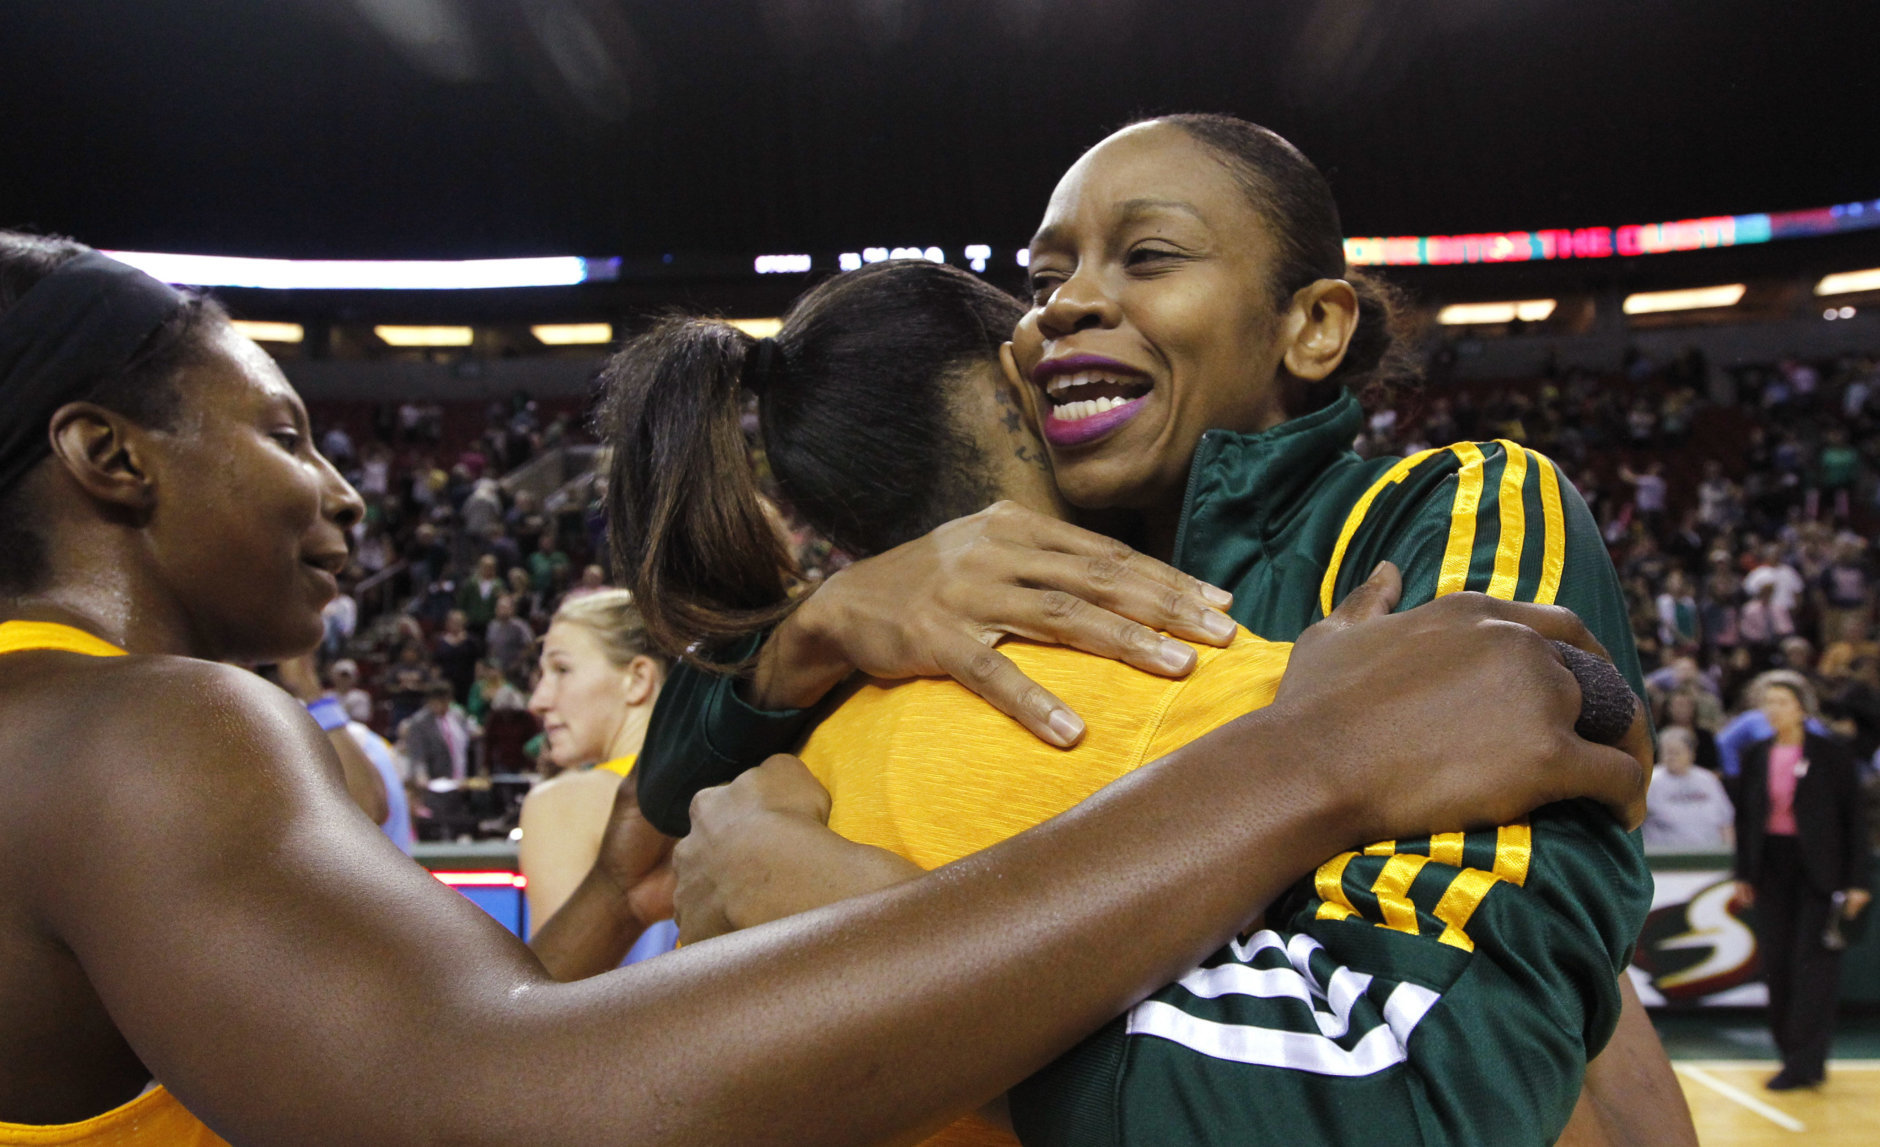 Seattle Storm's Tina Thompson, right, is embraced by Chicago Sky players following a WNBA basketball game, Tuesday, Sept. 18, 2012, in Seattle. The Storm won 75-60. Thompson, the all-time scoring leader in the WNBA, became the first and only player to reach 7,000 career points. She reached the milestone during the first half of their game. (AP Photo/Elaine Thompson)